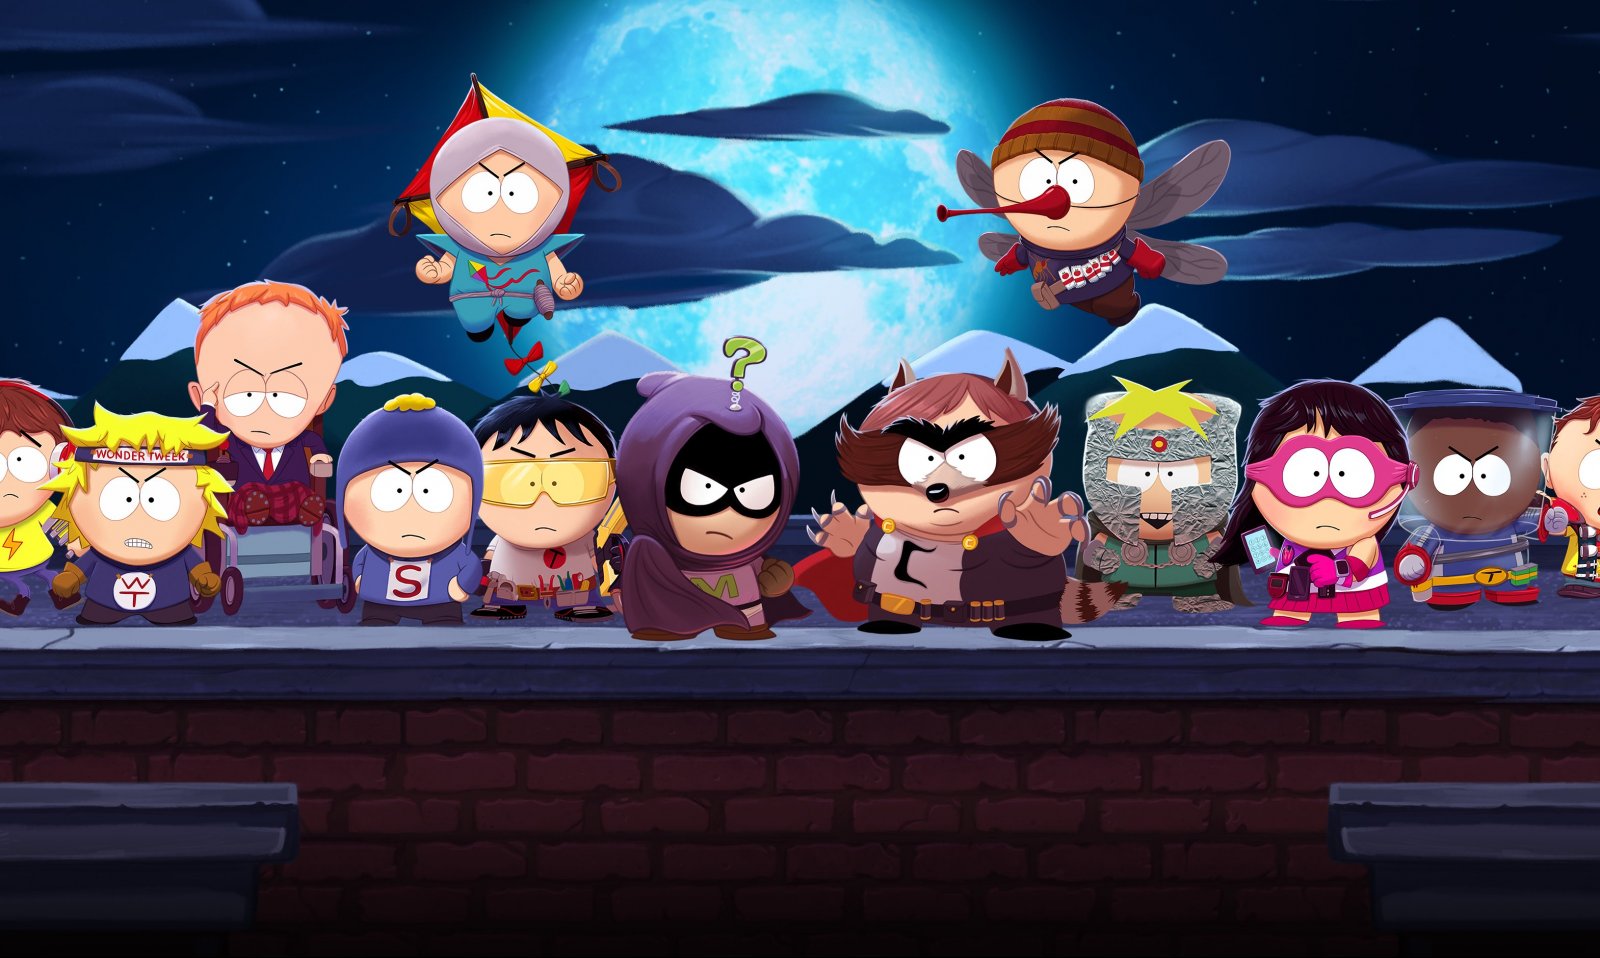 south park the fractured but whole free pc download reddit